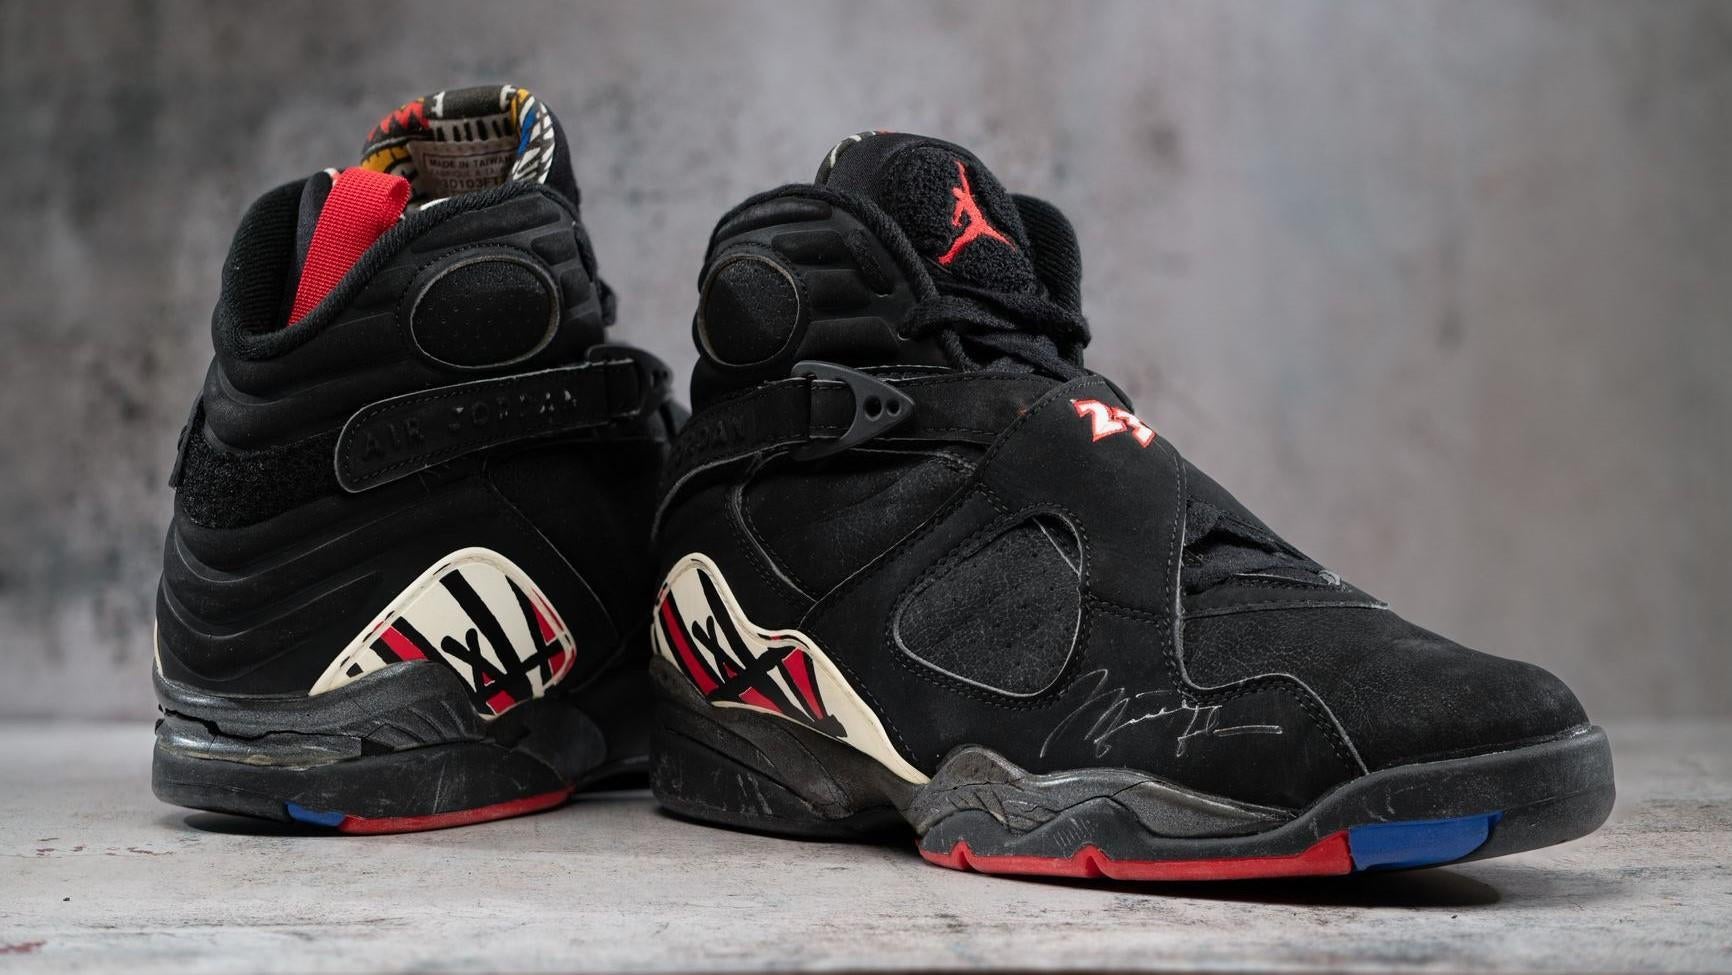 Michael Jordan signed, game-worn shoes from 1993 NBA playoffs sell for $192,000 at auction